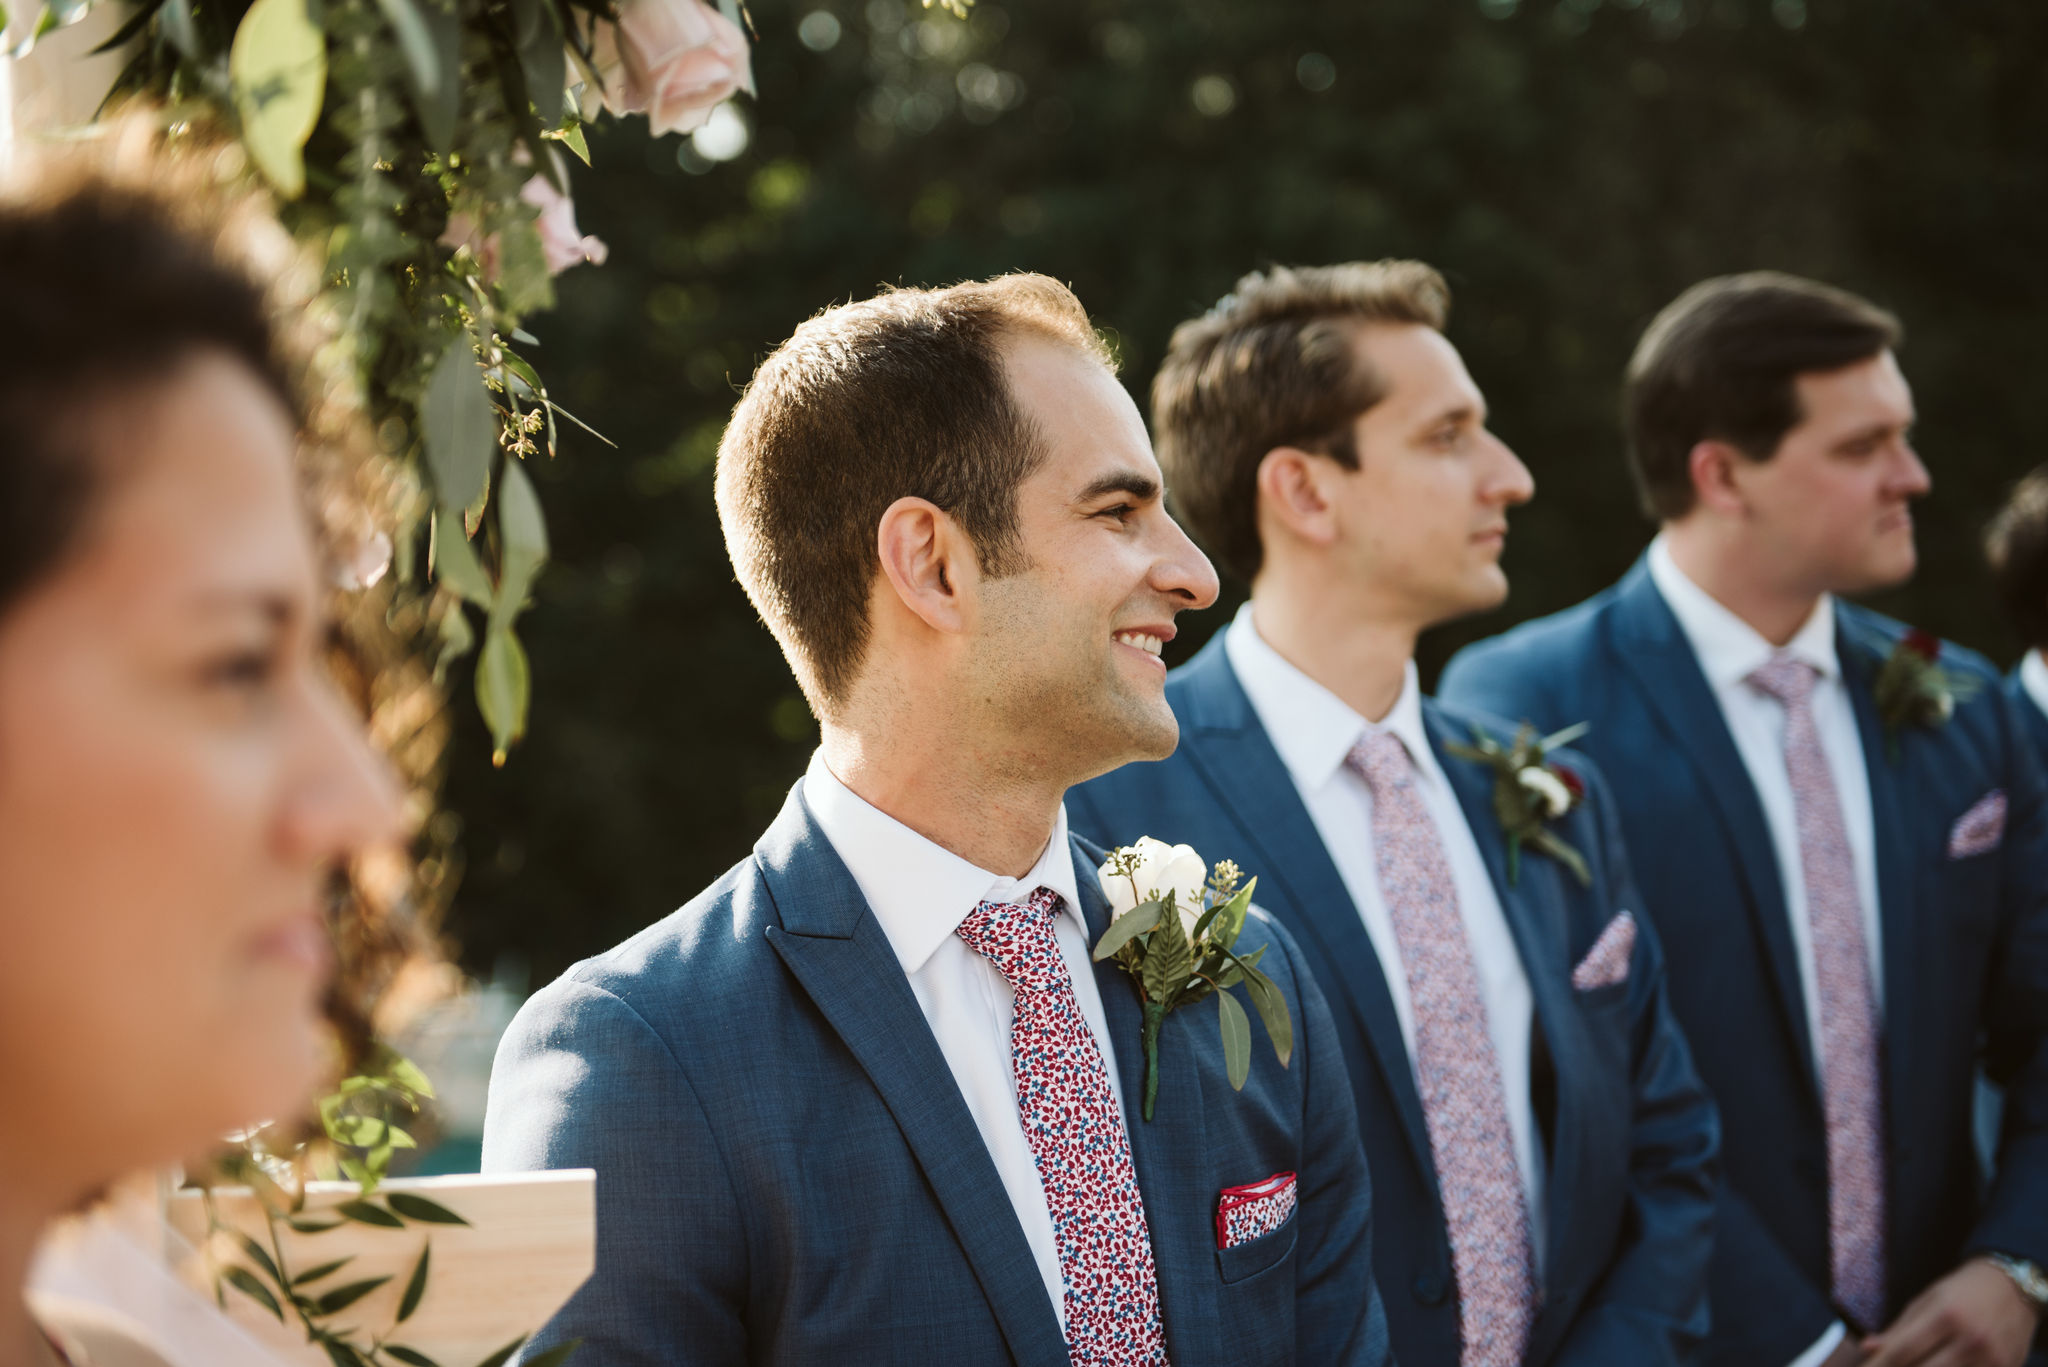  Phoenix Maryland, Baltimore Wedding Photographer, Eagle’s Nest Country Club, Classic, Romantic, Groom Waiting for Bride at the Altar, Blue Generation Tux Suit, Polka Dot Knotty Tie 